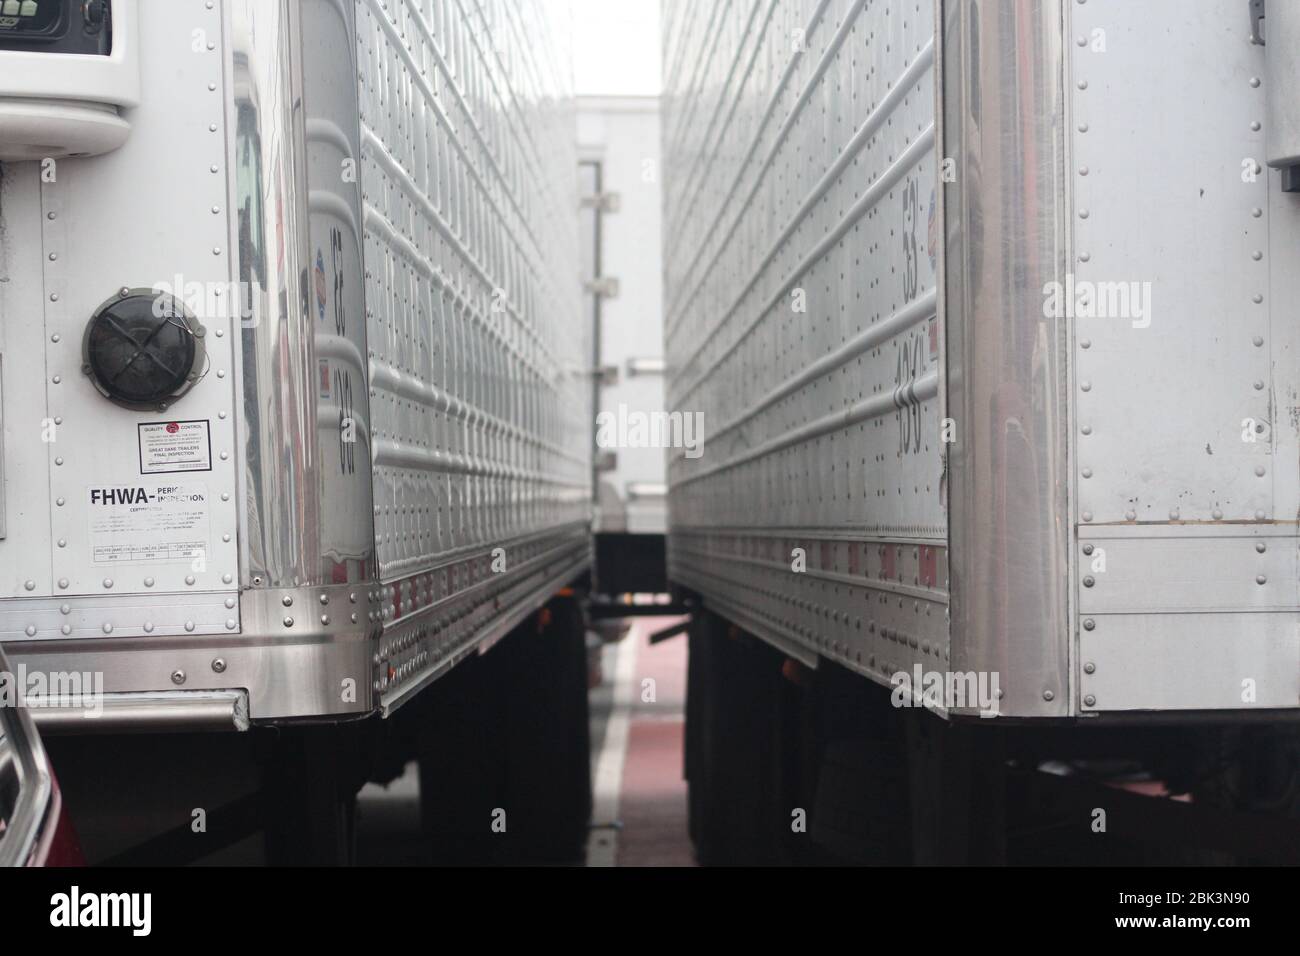 New York, New York, USA. 30th Apr, 2020. Six trucks, including two large refrigerated ones, block part of the street near the Andrew T. Cleckley Funeral Home in Brooklyn where bodies non properly cared have been removed. 60 bodies were stored in 4 non-refregerated vehiciles lining the street nearby stores. Neighbors reported a foul smell still persistent and fluids dripping from the trucks. Some remains were also found lying on the facilityÃ¢â‚¬â„¢s floor. The funeral home was overwhelmed by COVID-19 deaths in New York. Credit: Marie Le Ble/ZUMA Wire/Alamy Live News Stock Photo